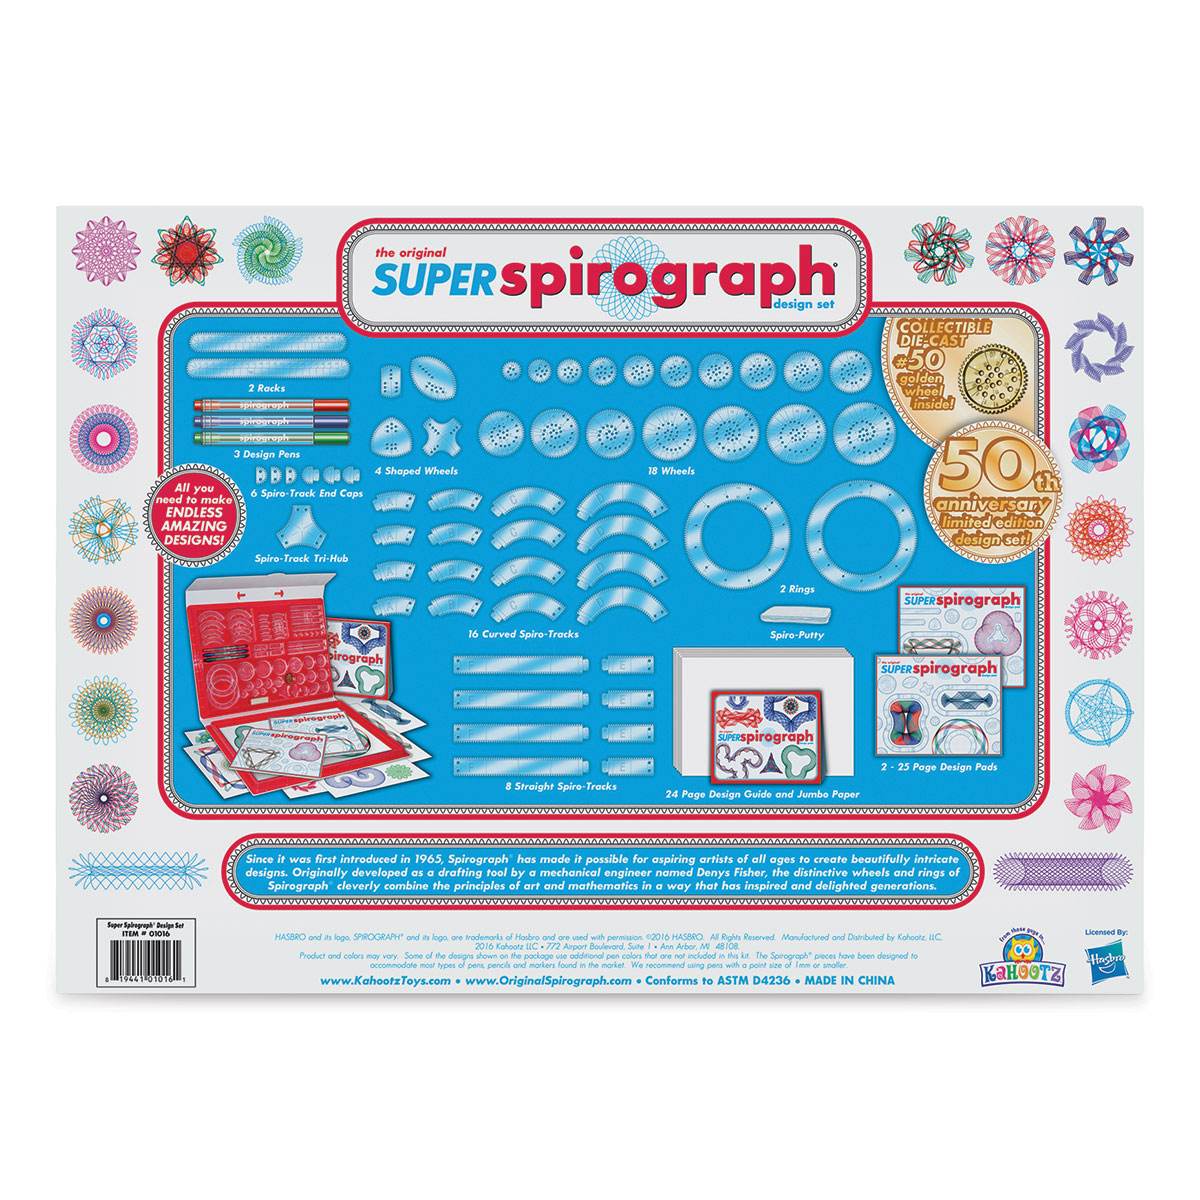 One Loop for Every Tooth: Spirograph Wheel 52 - SpiroGraphicArt